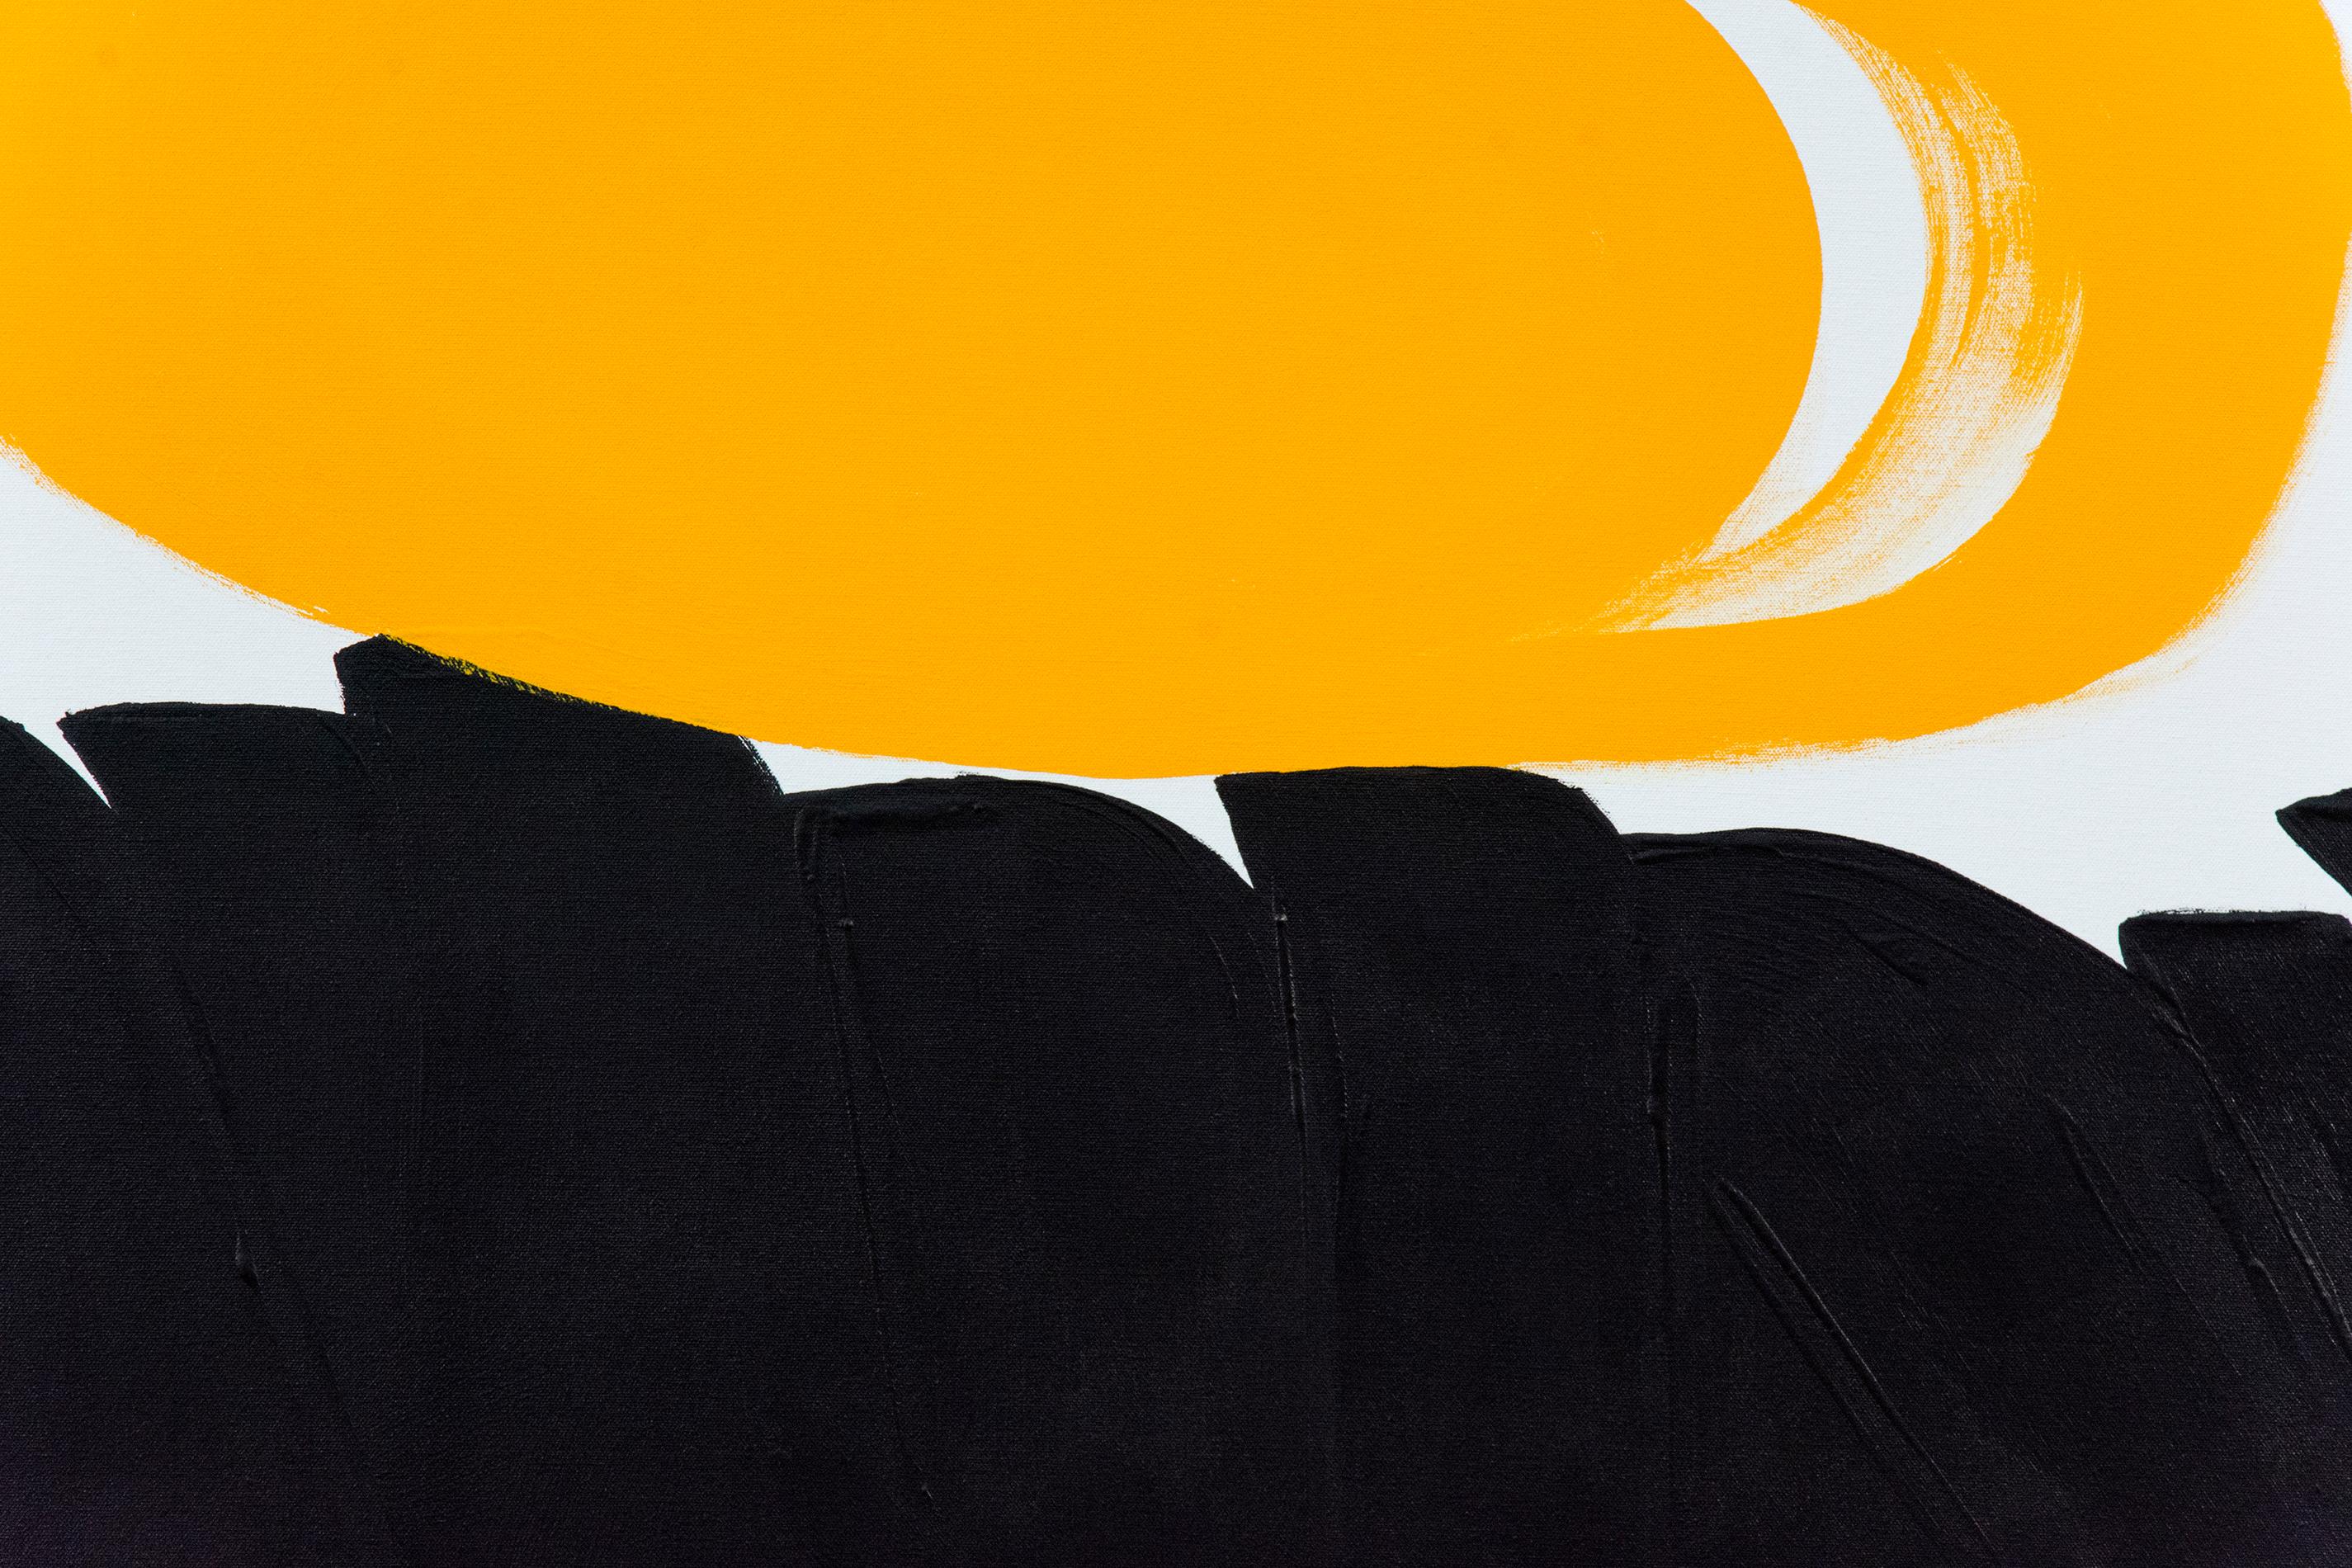 Procession - bold, black, white, yellow, abstract minimalist, acrylic on canvas - Painting by Tim Forbes